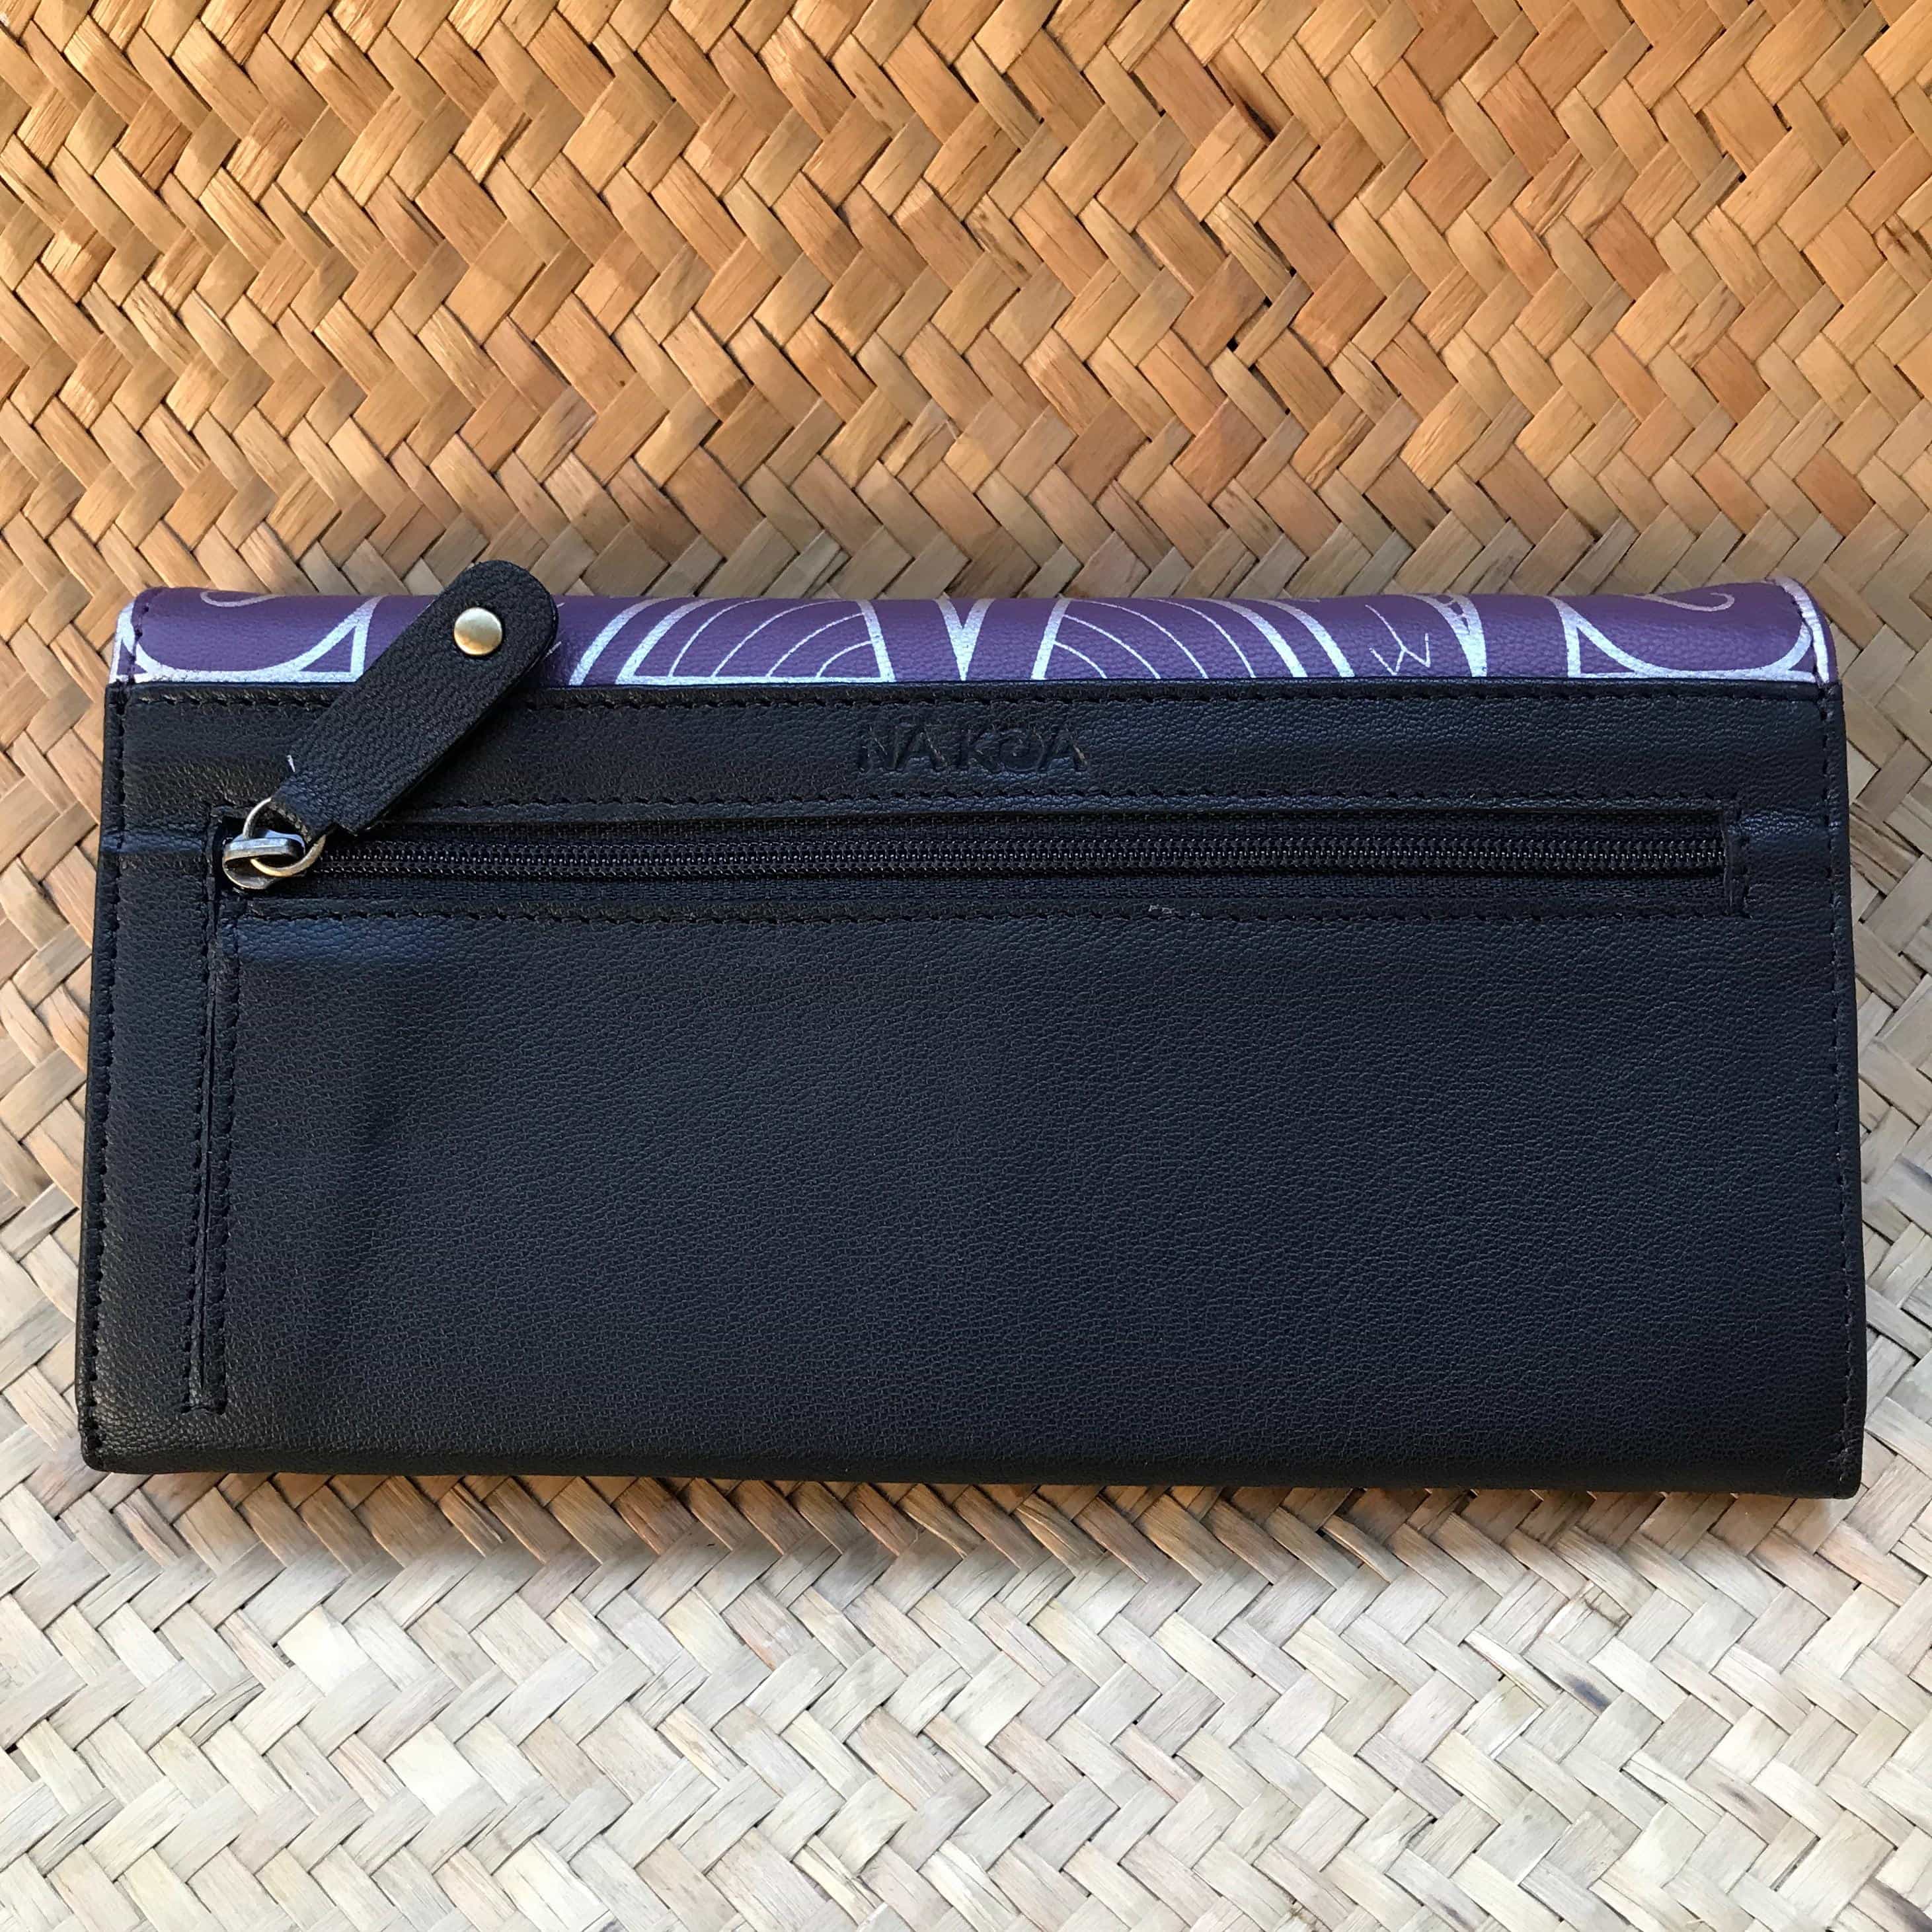 Back view of a purple leather clutch wallet